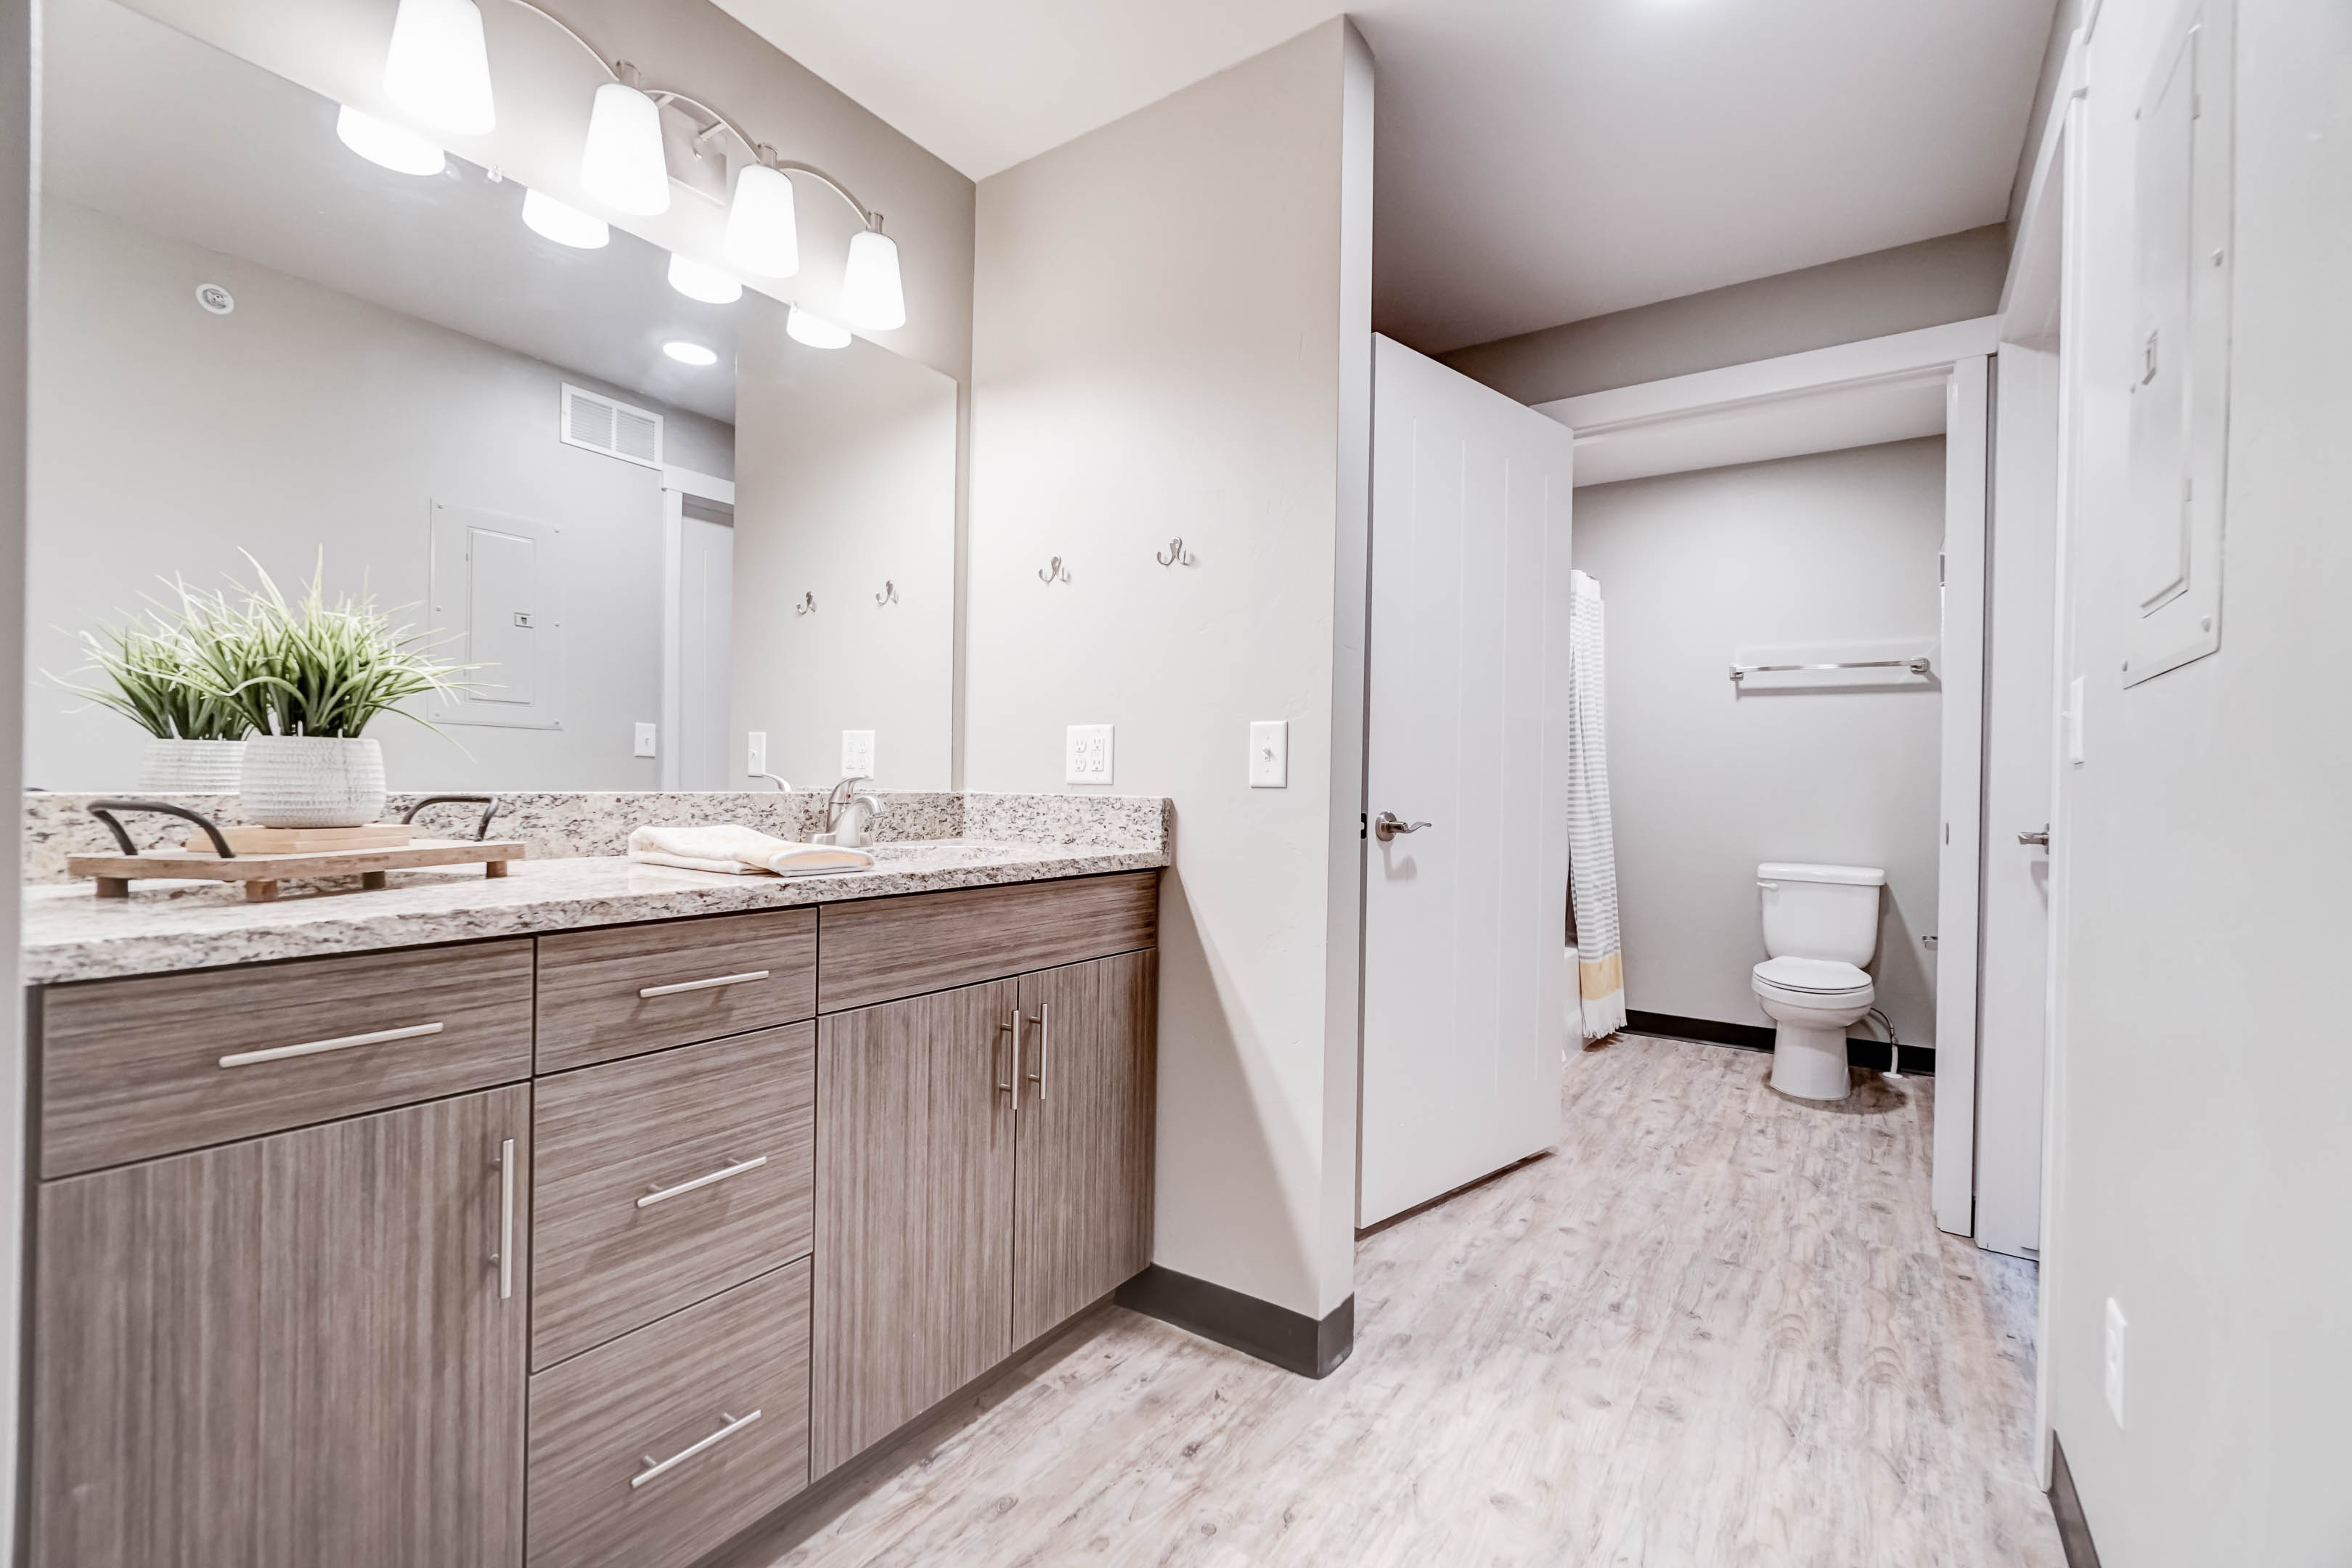 Vanities and bathrooms are separate so someone can be showering while others are getting ready.  Between the two vanities there are more drawers than tenants!